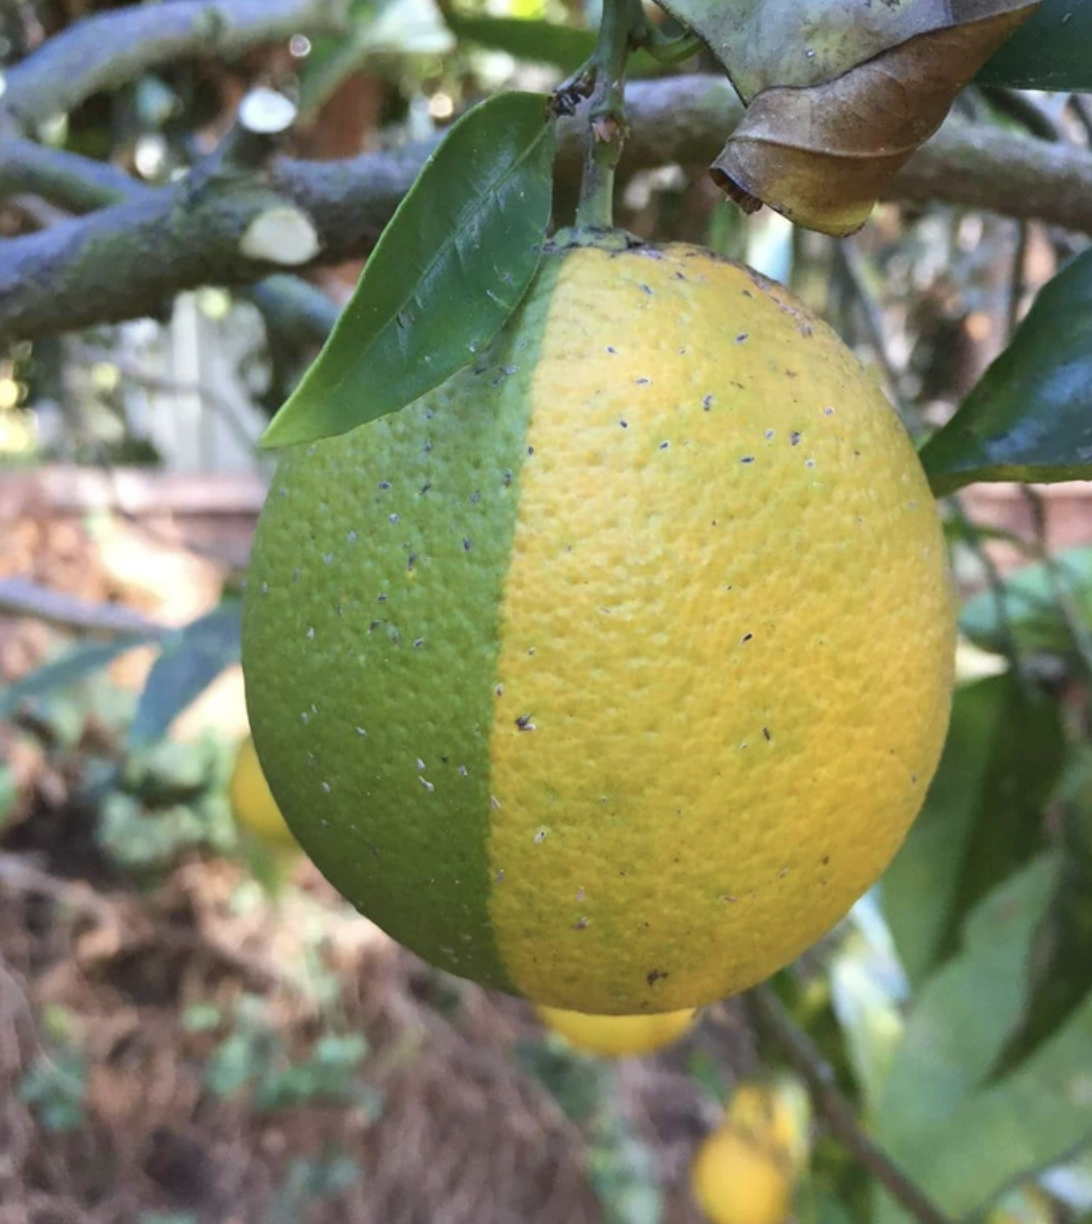 Close-up of a lemon growing on a tree with leaves and branches in the background